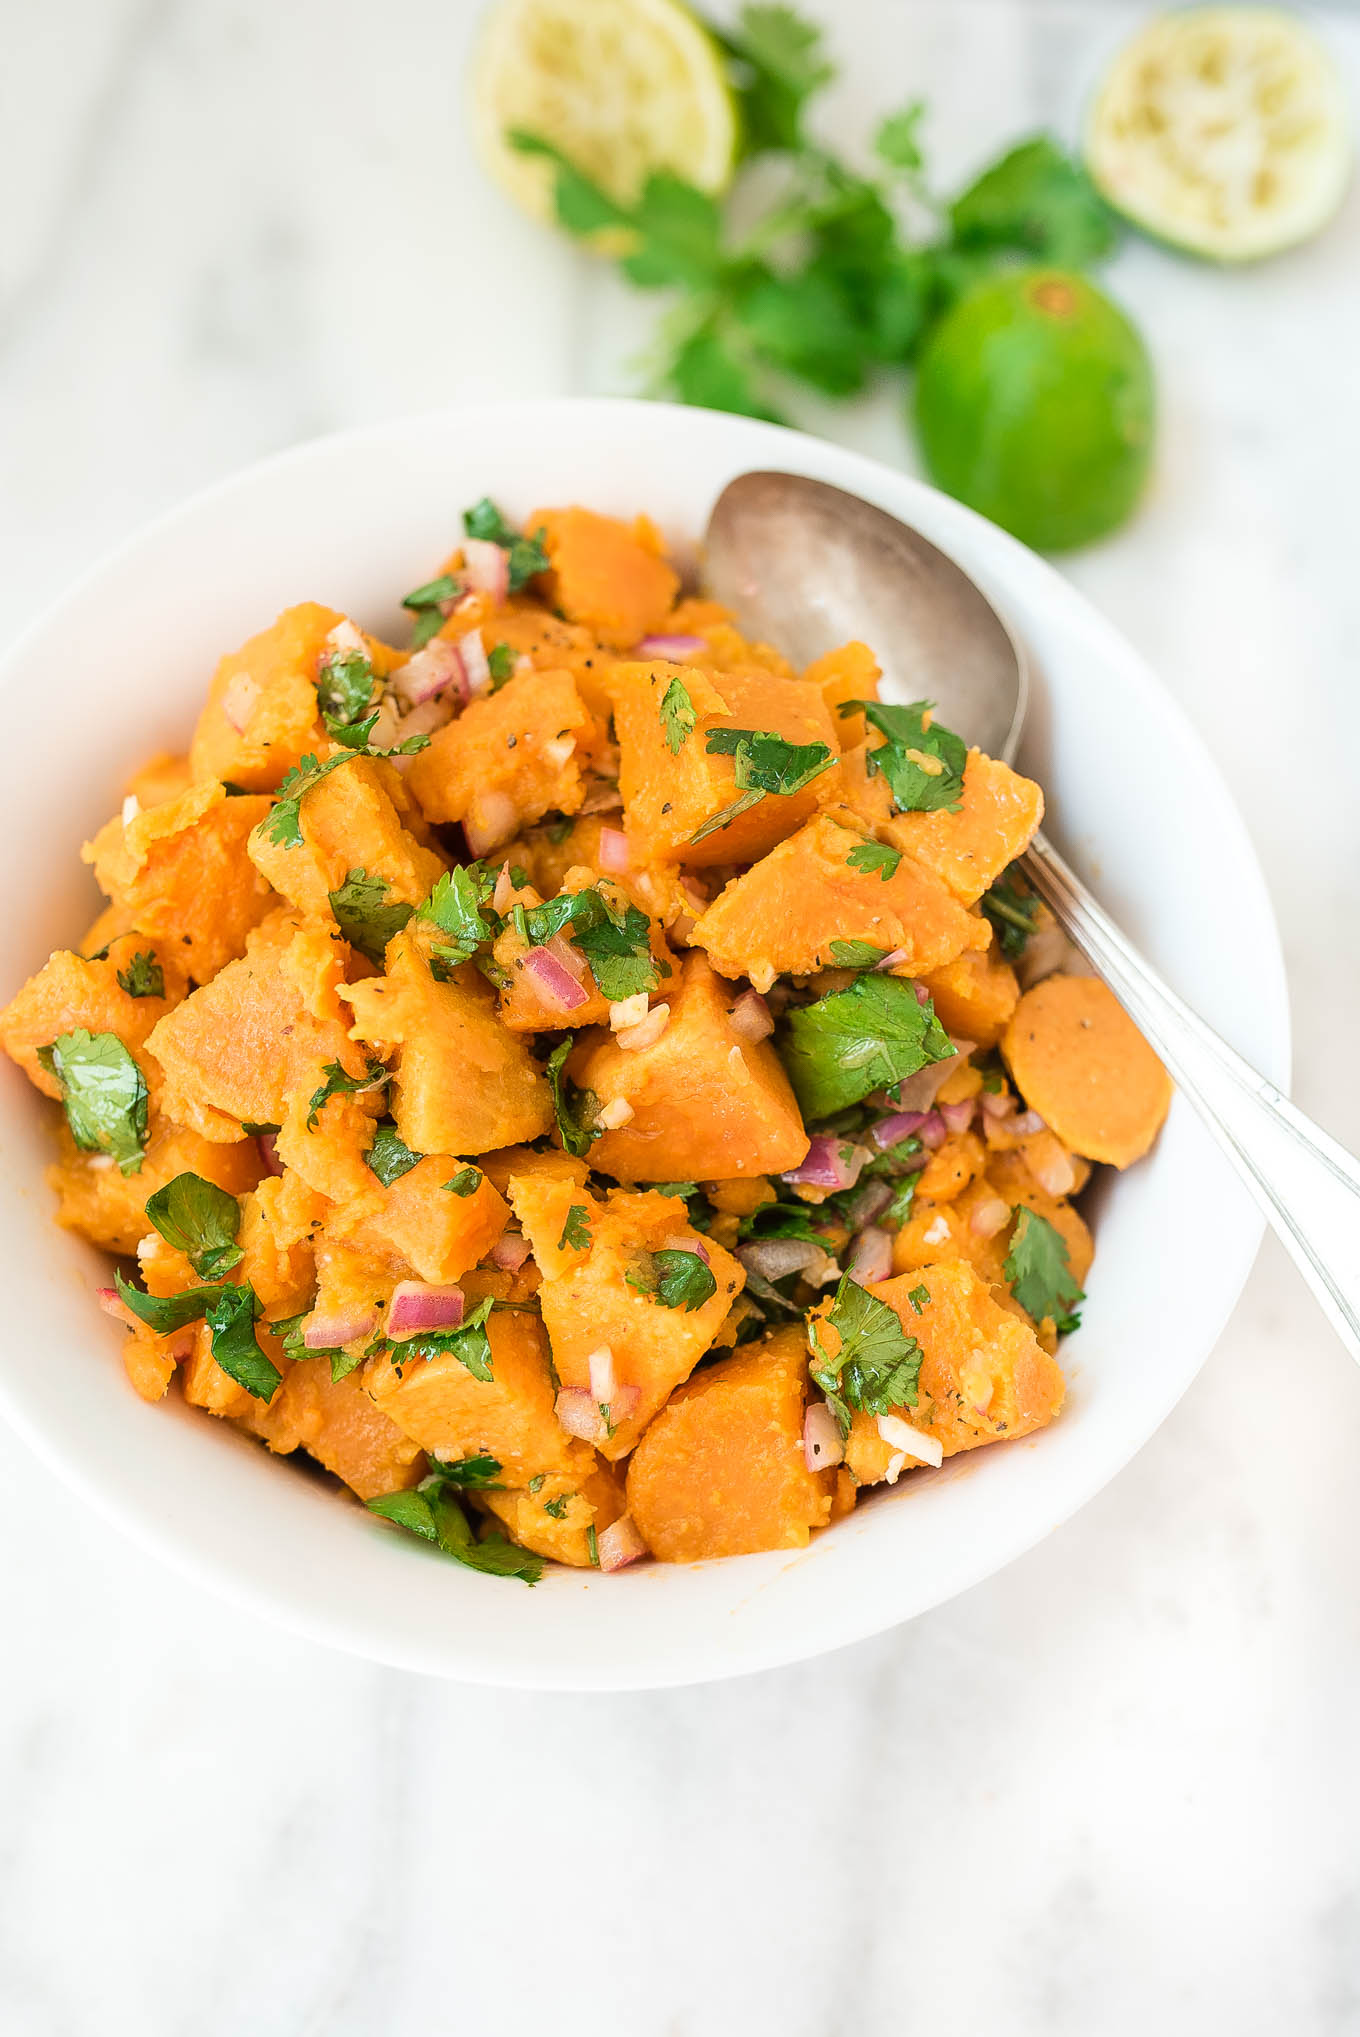 Cilantro Lime Sweet Potato Salad is bursting with flavor from the sweet potatoes and the garlicky and citrus dressing- it's a match made in heaven!